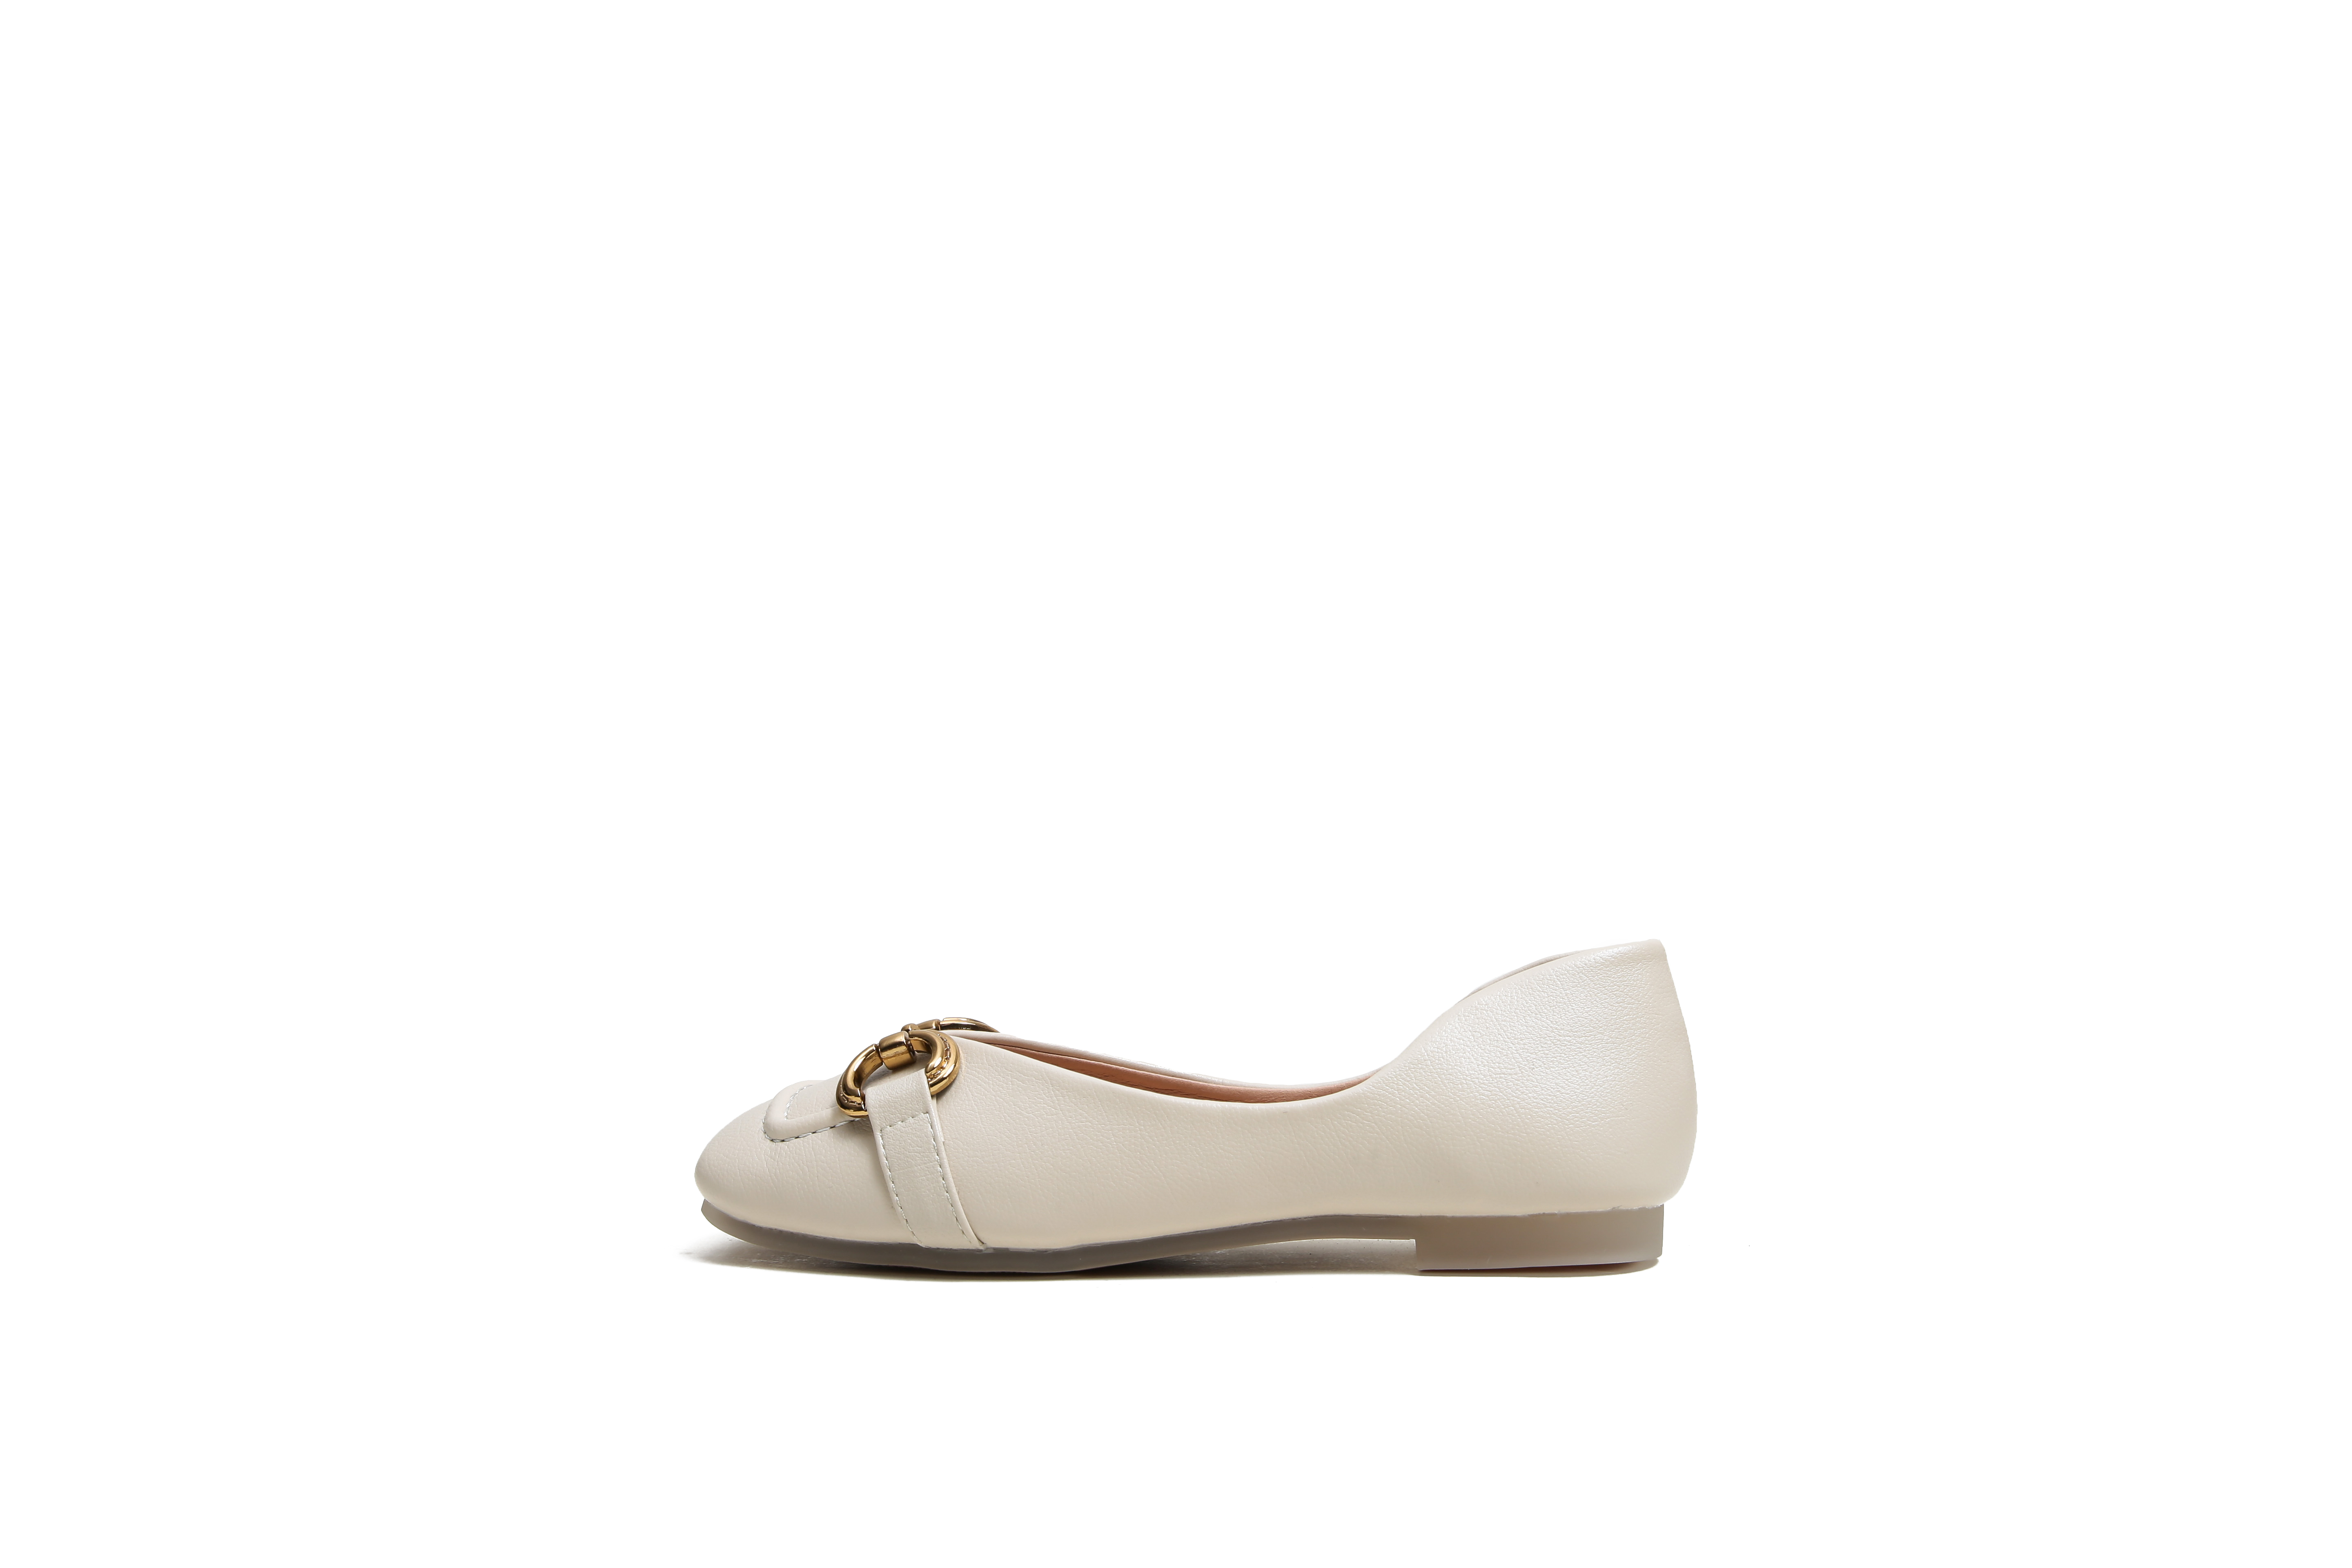 Square-toe Lovely flats N1